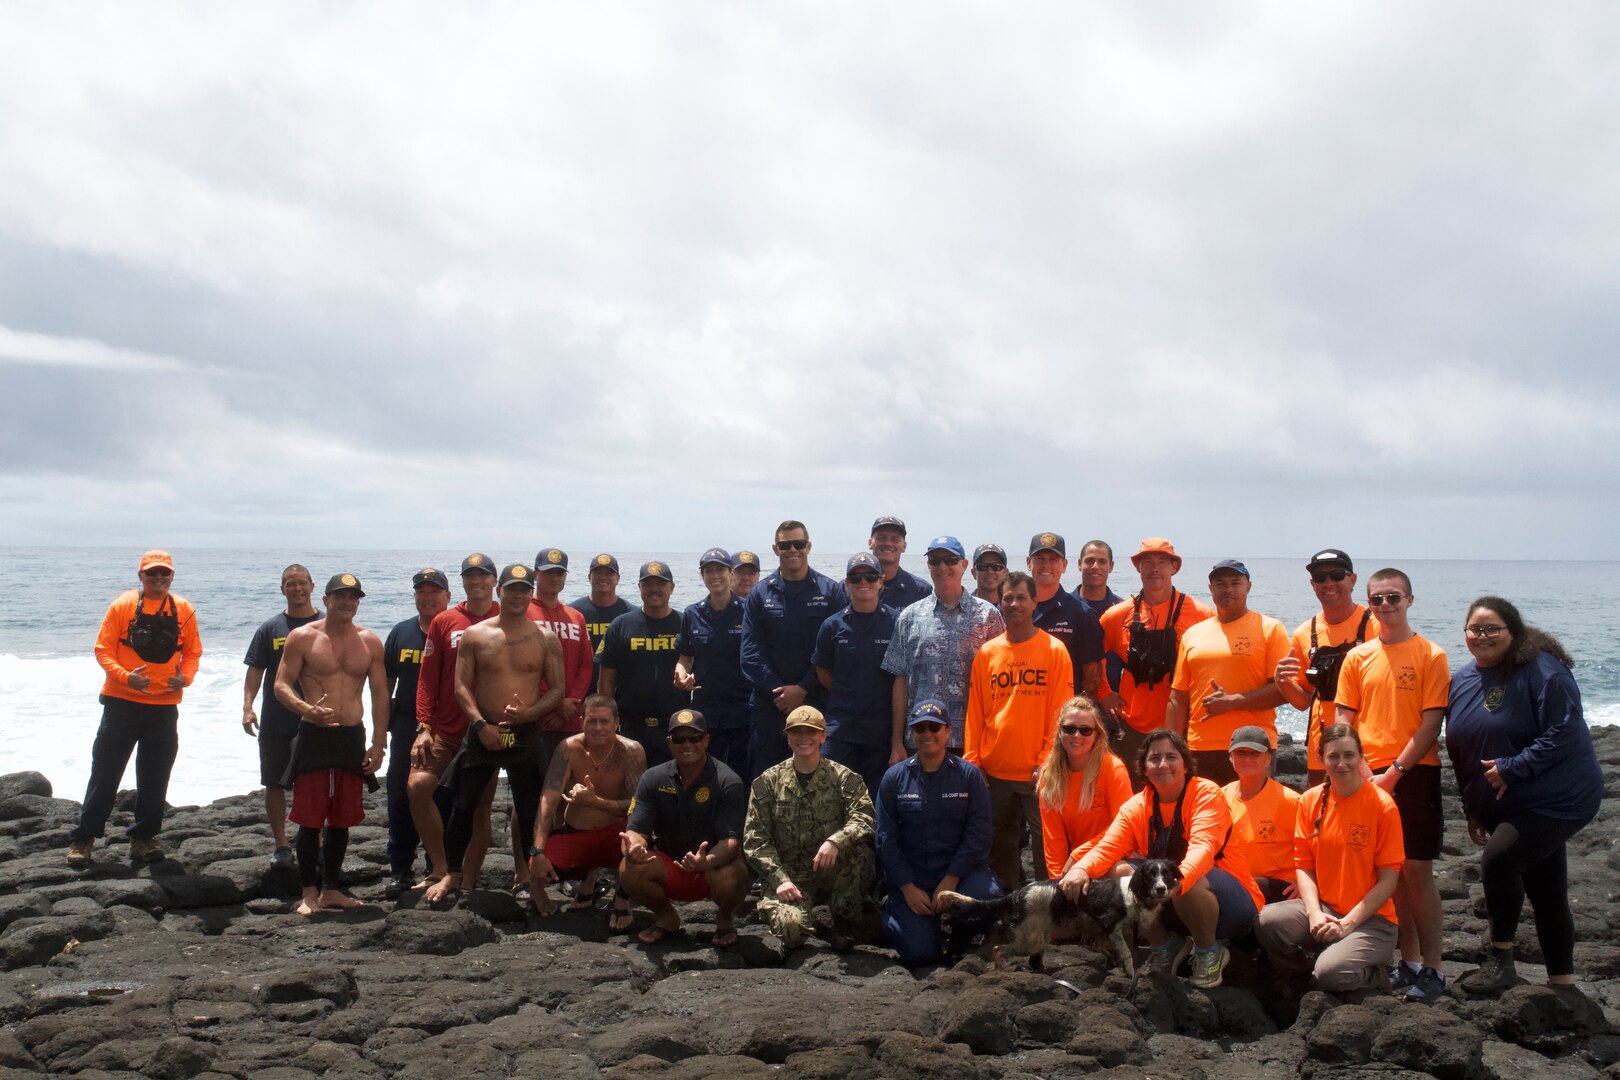 Coast Guard and County of Kauai agency personnel successfully completed a search and rescue exercise (SAREX) off Kauai’s coast, Thursday.

The exercise simulated a multi-agency response to the report of an overdue fishing vessel that failed to return to shore.